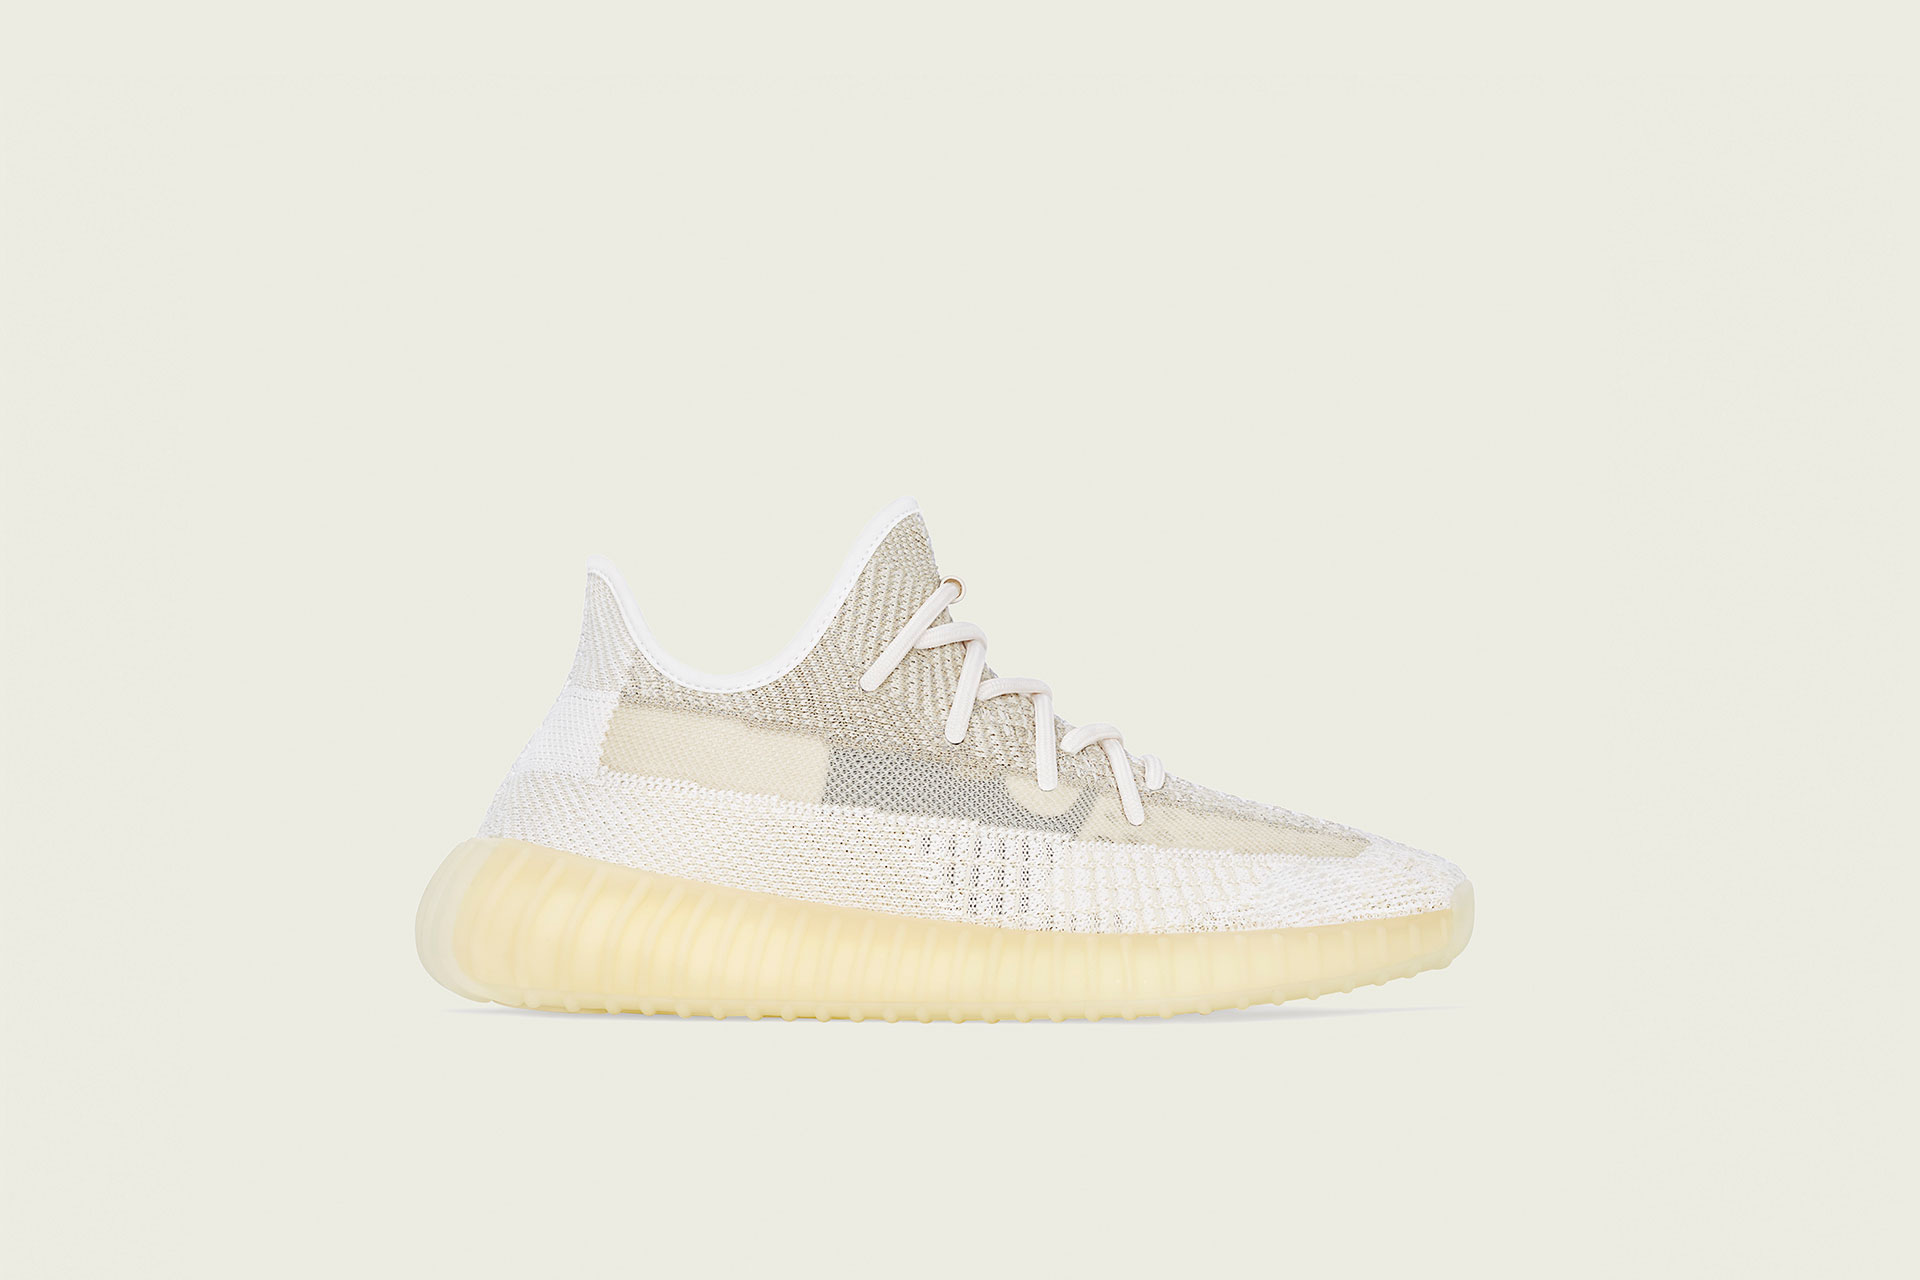 adidas Yeezy Boost 350 V2 - FZ5246 - Natural - Footshop - Releases